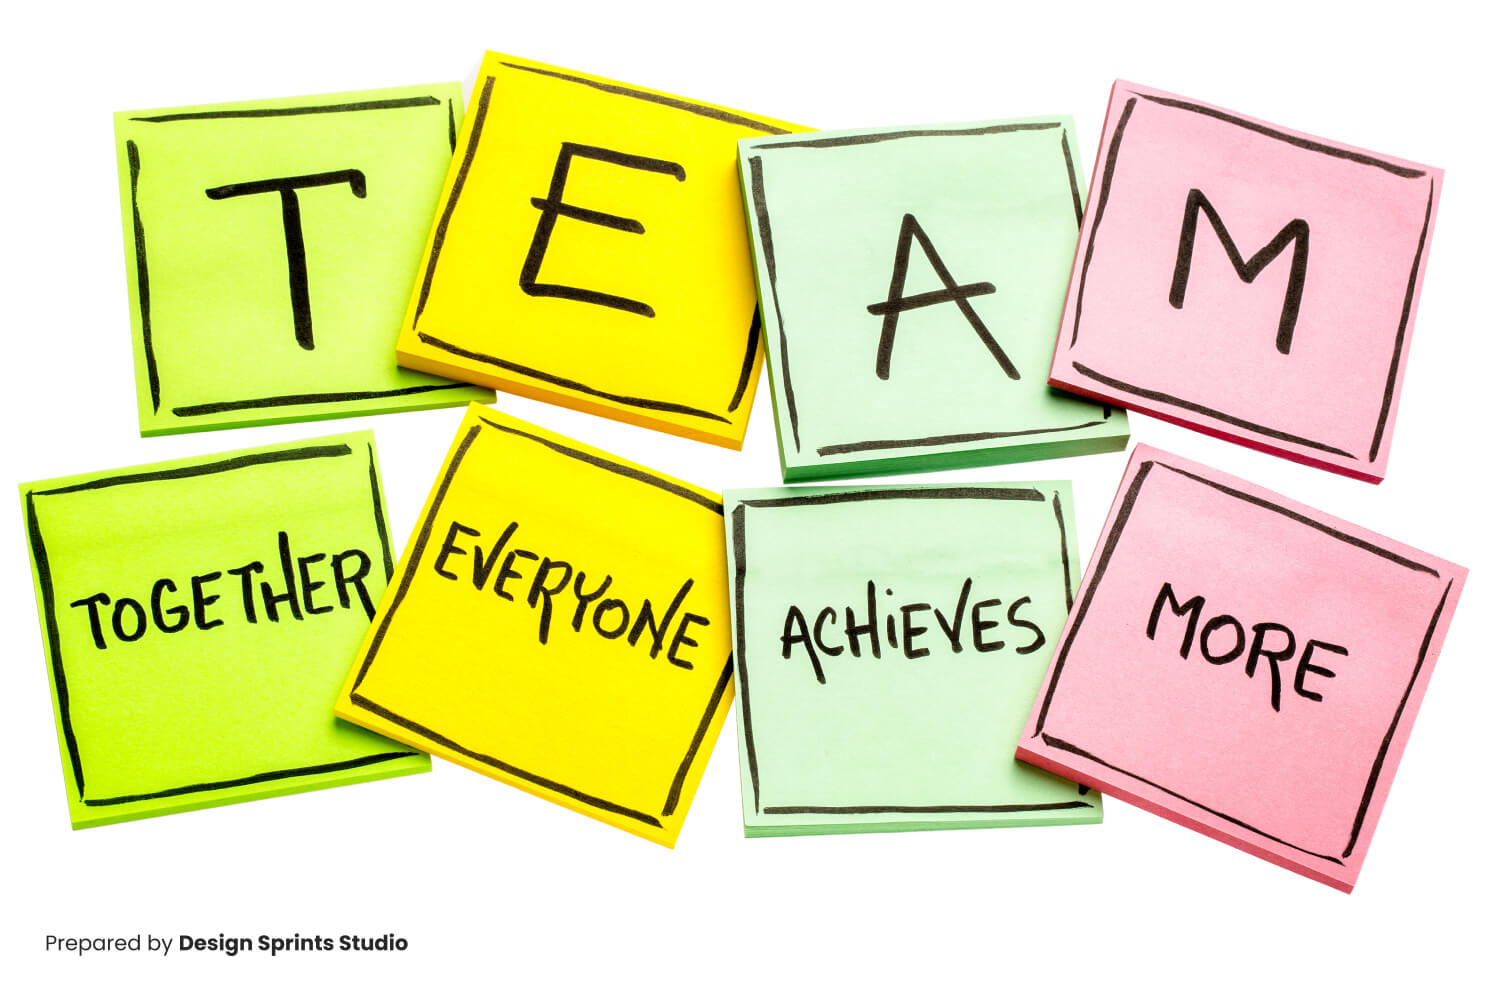 The Ultimate Guide for Improving Team Collaboration